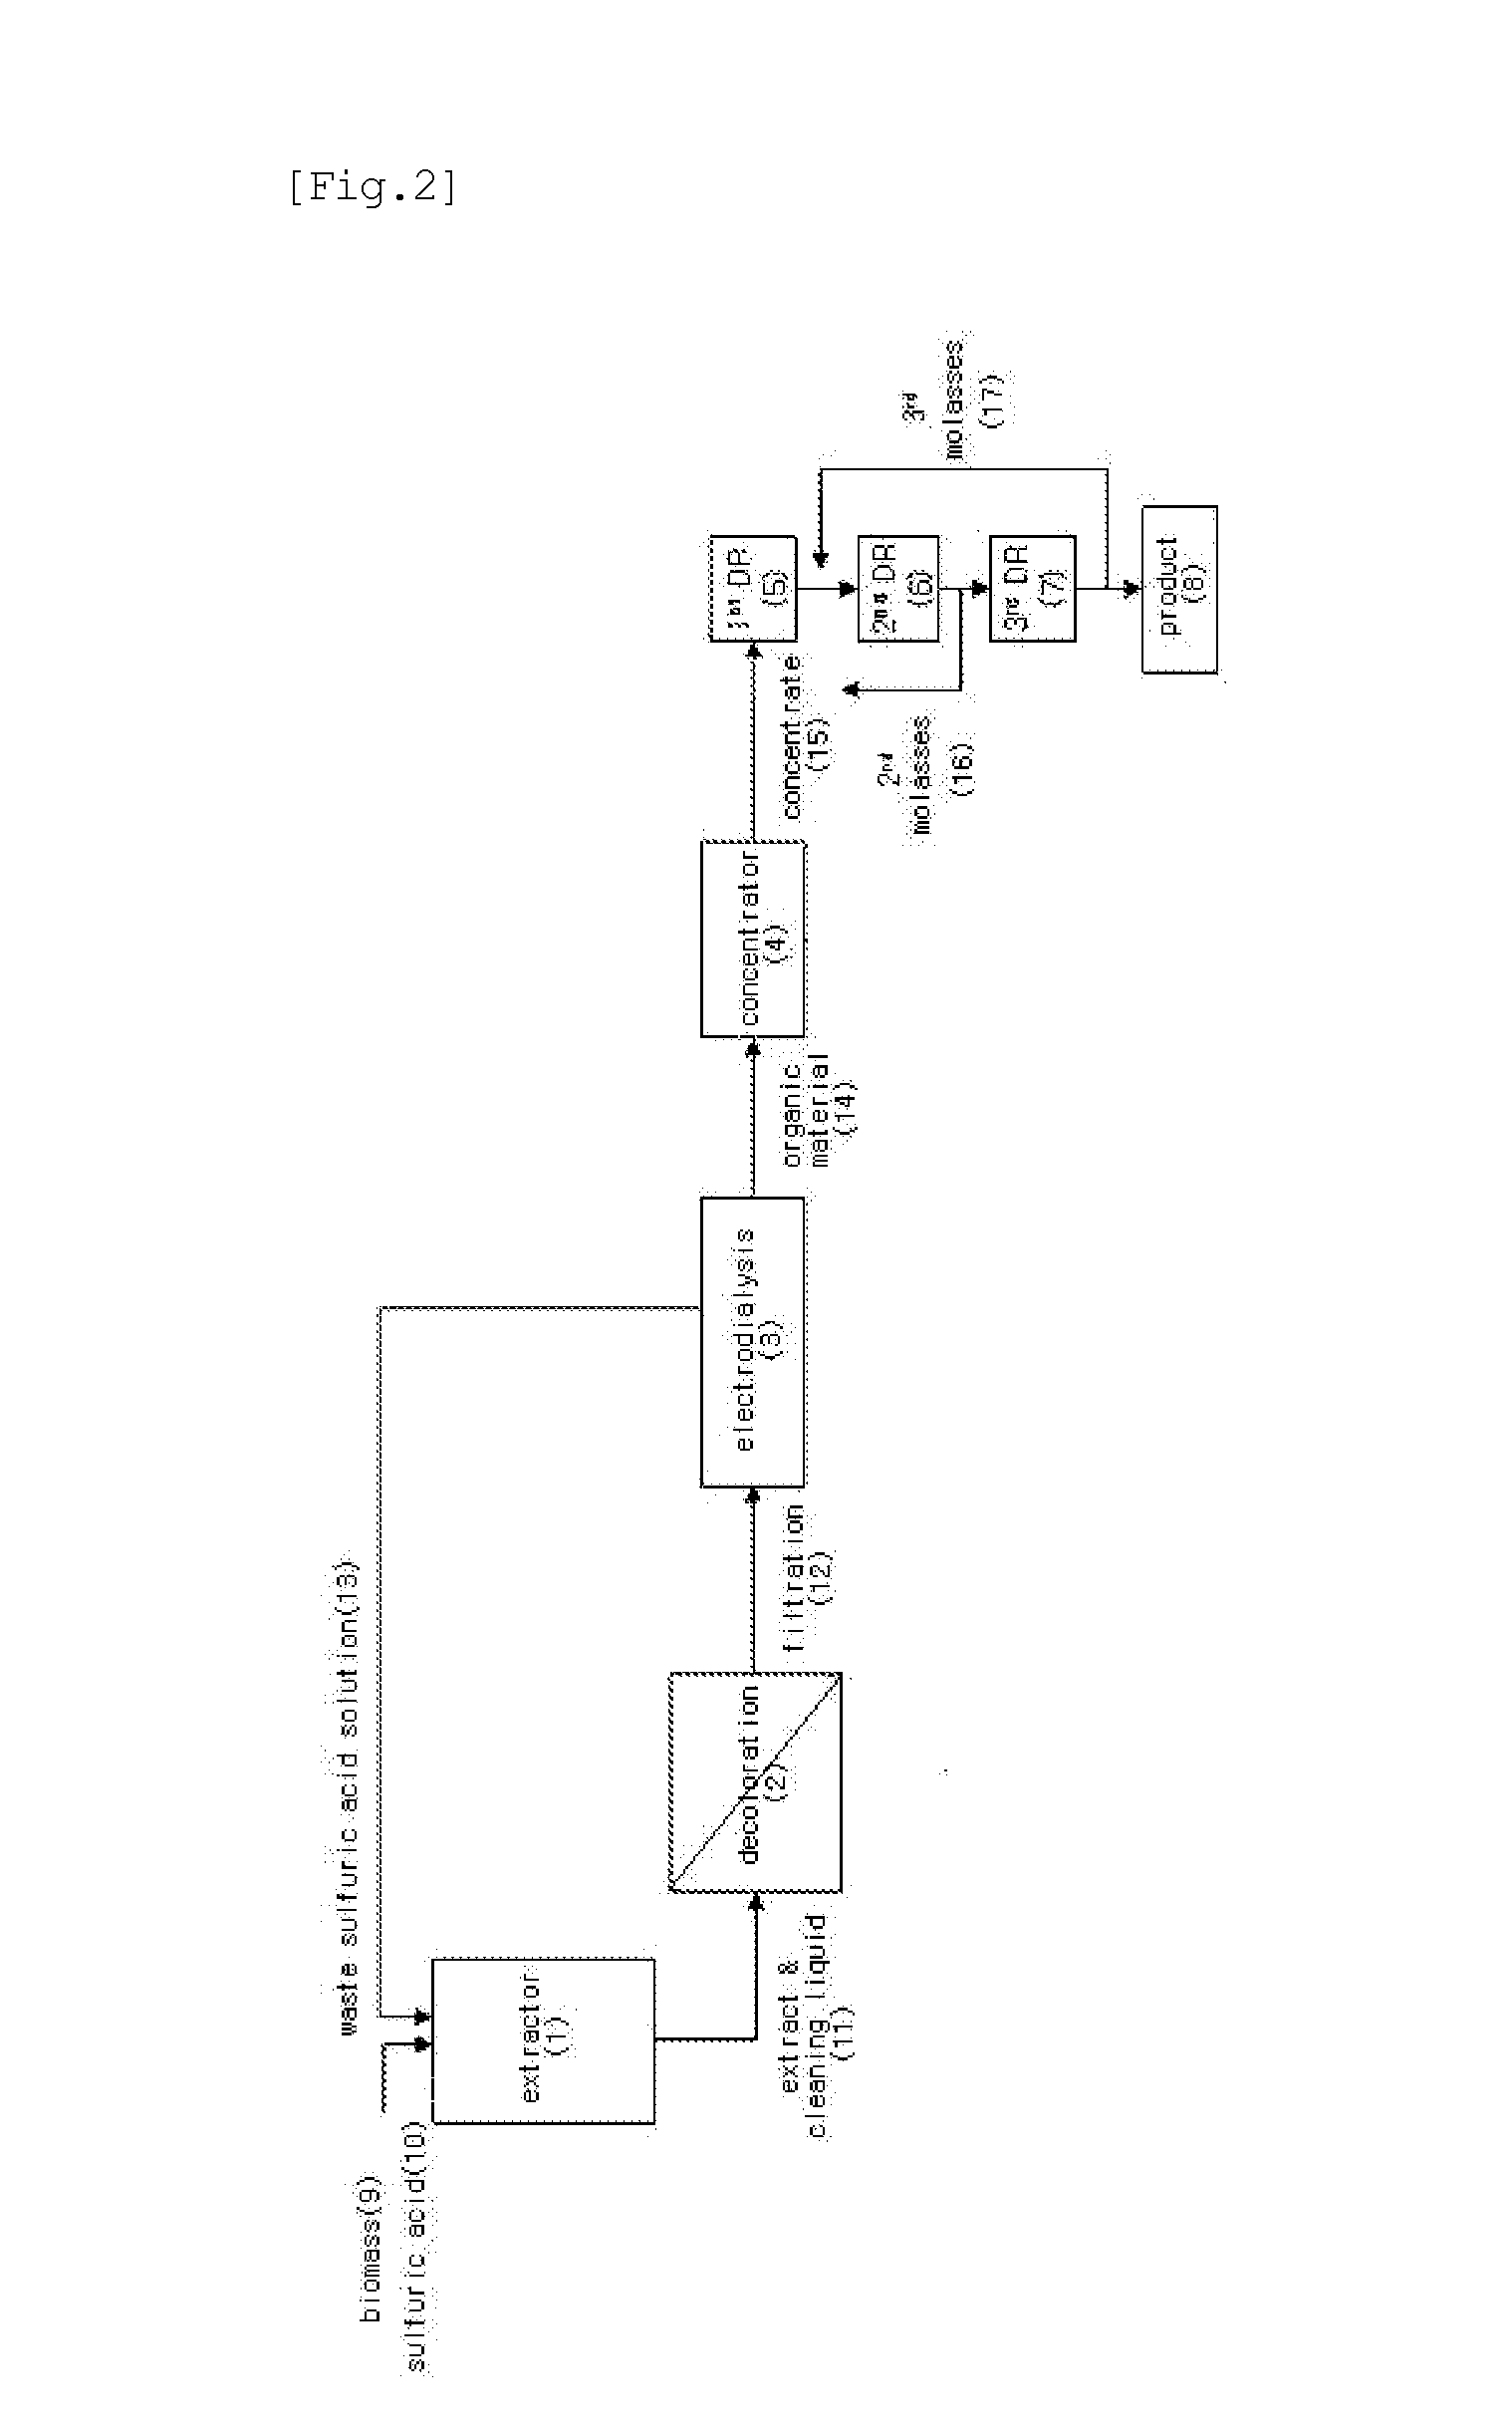 Economic Process for Producing Xylose from Hydrolysate Using Electrodialysis and Direct Recovery Method